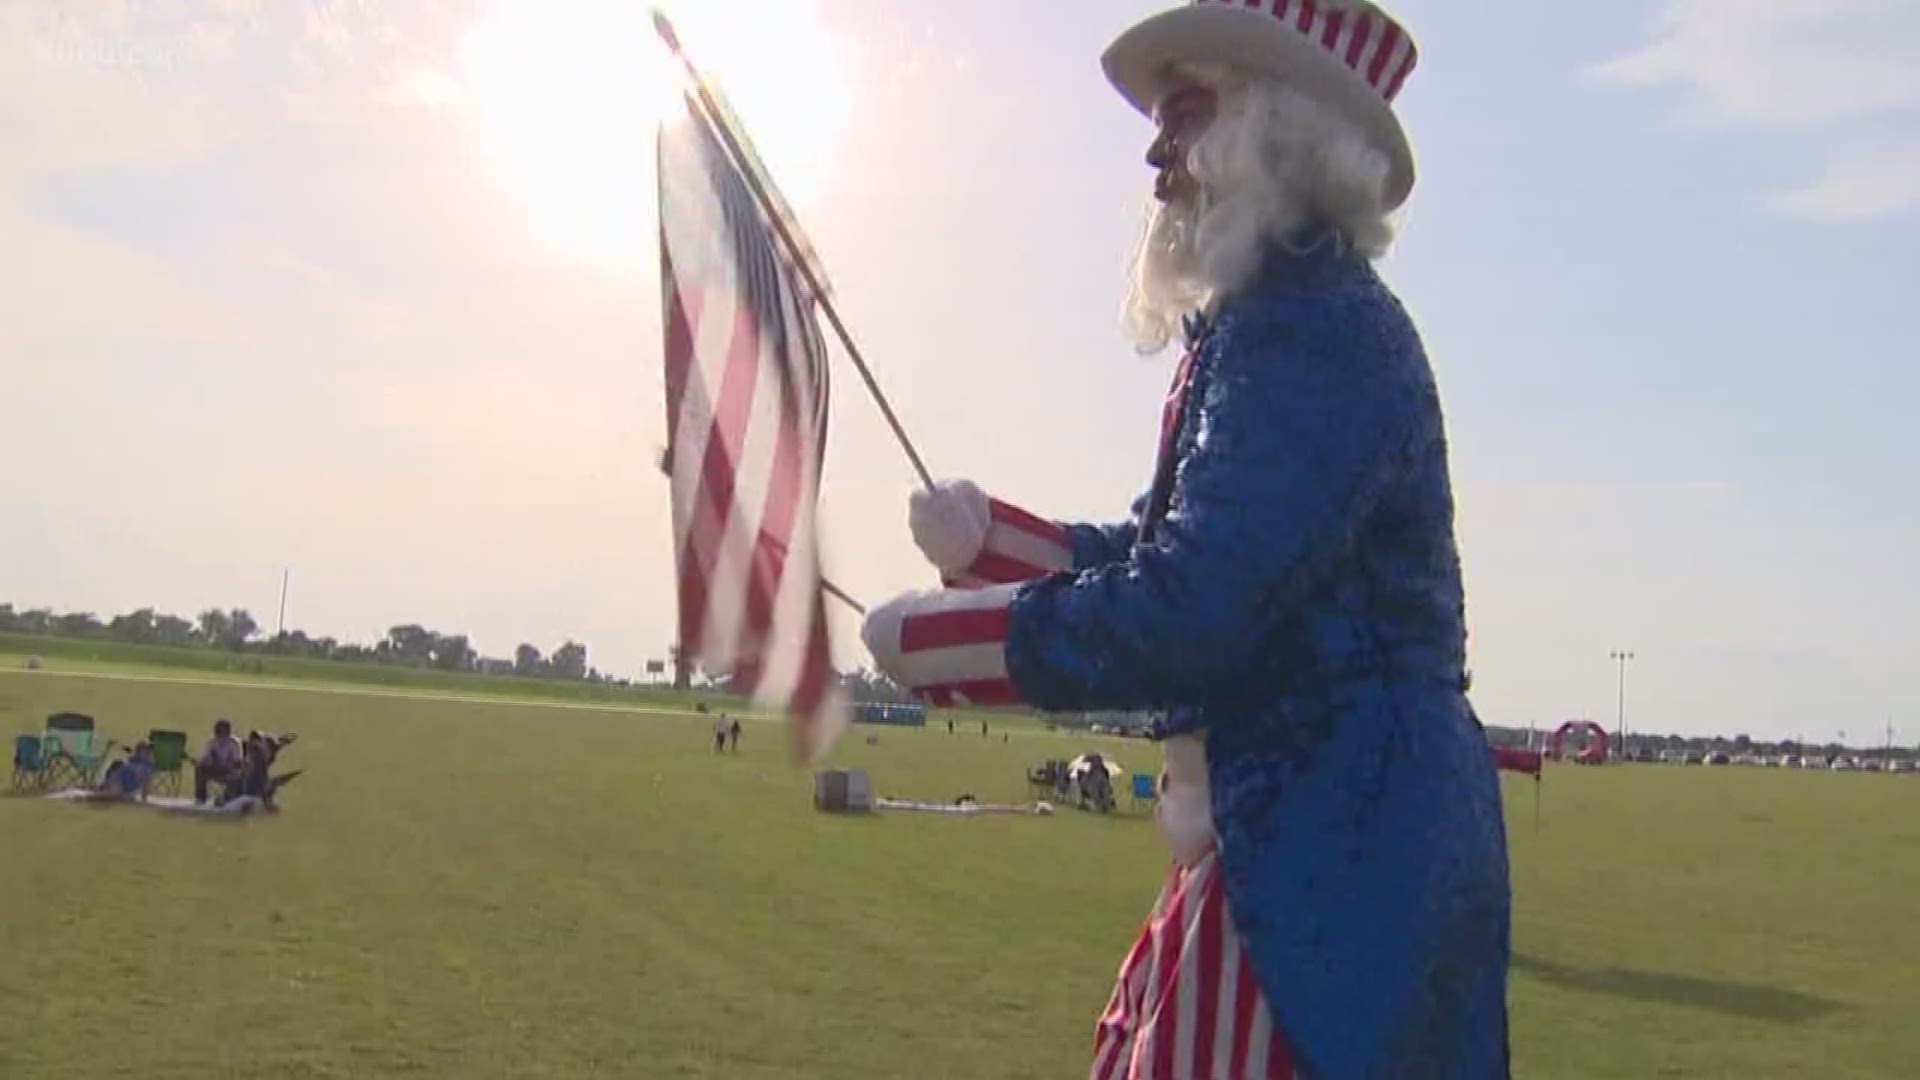 Thousands of people gathered to have fun in Sugar Land for the Fourth of July.